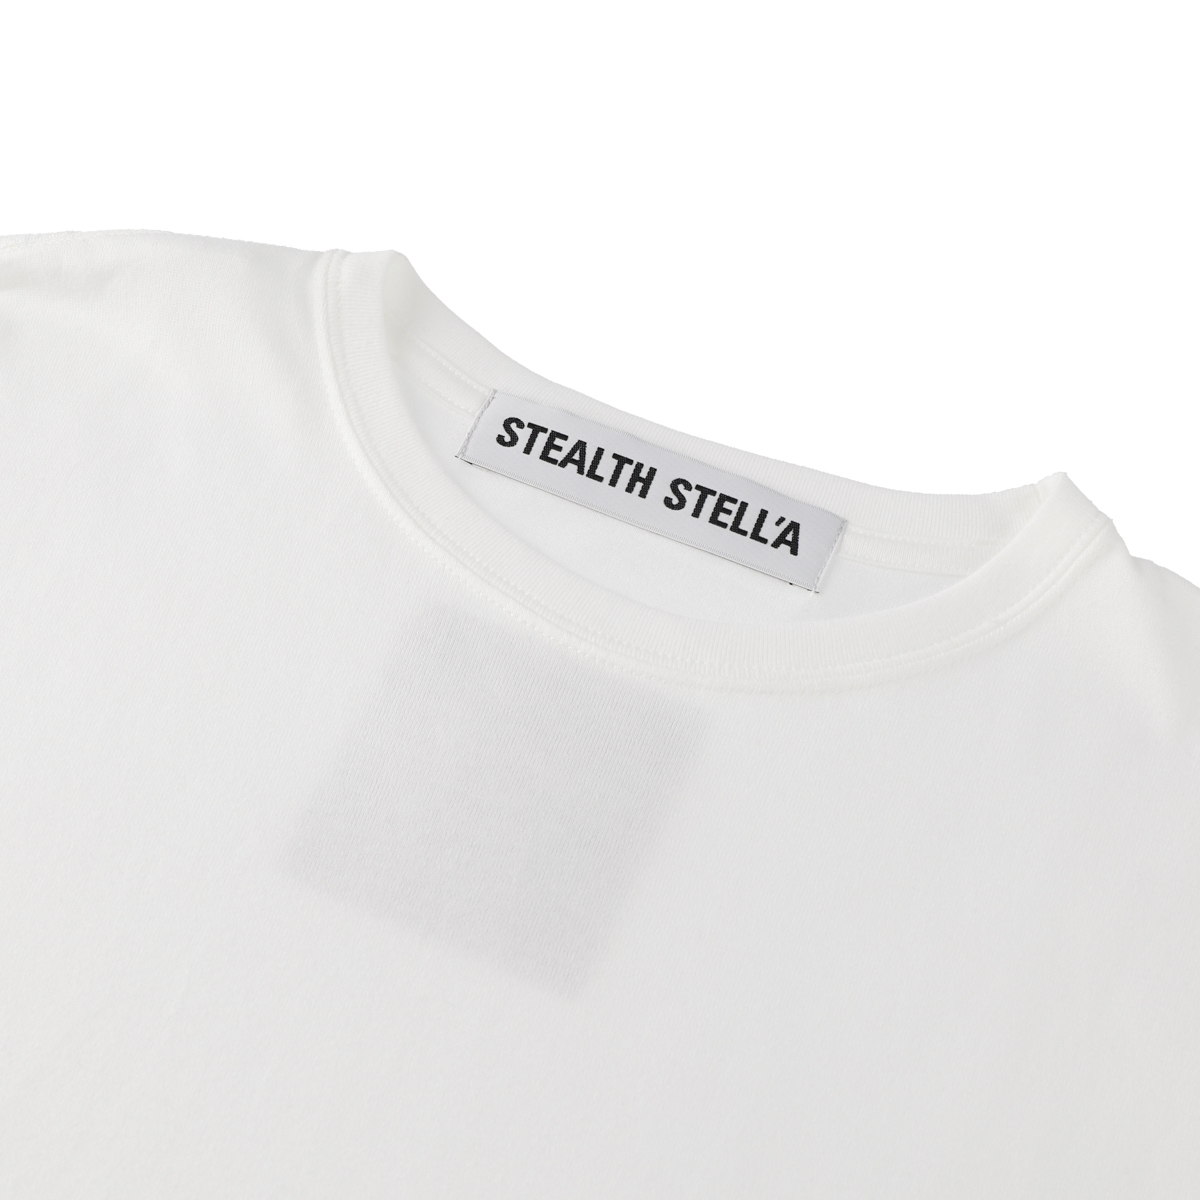 【STEALTH STELL'A】BACK LABEL（WHITE）